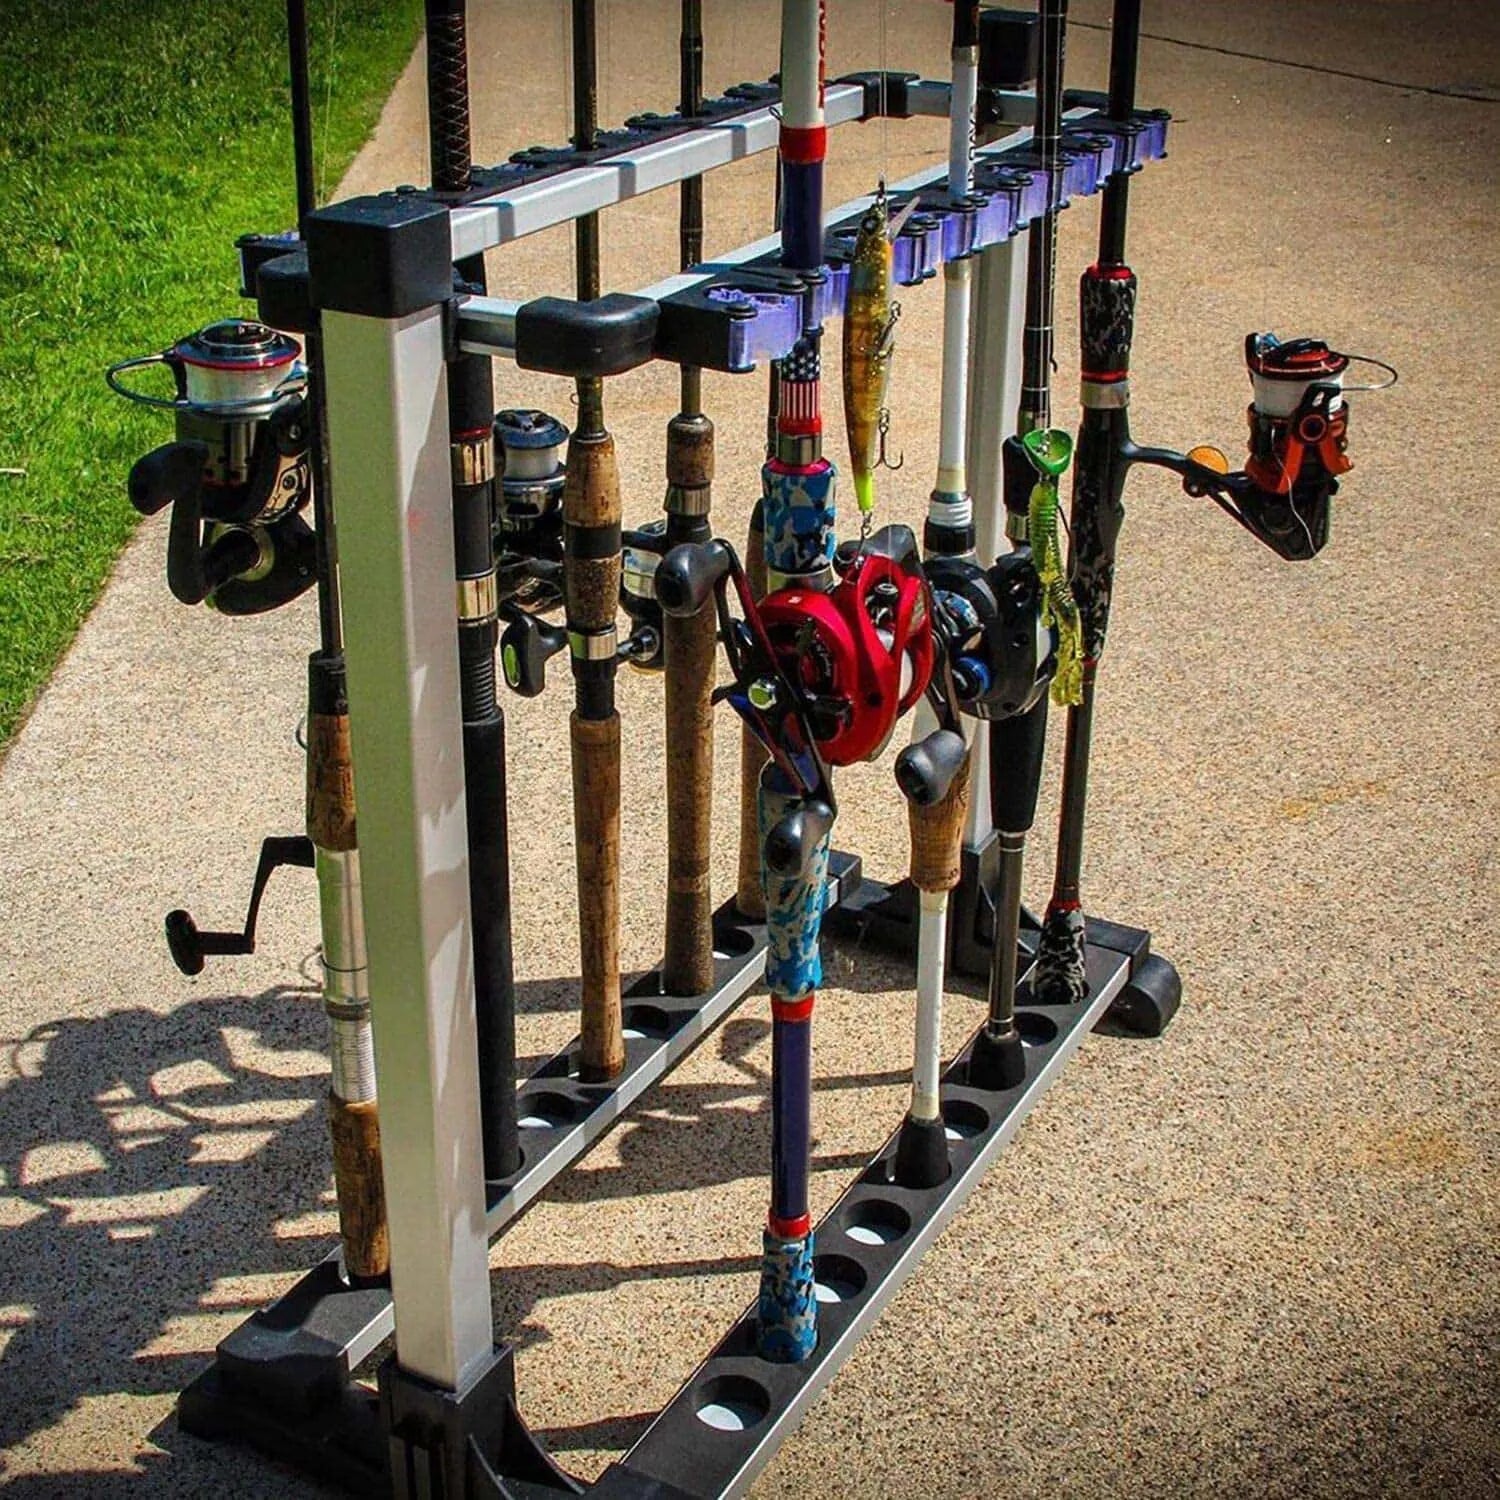 Fishing Made Easy with the Best Fishing Pole Holders Available Today